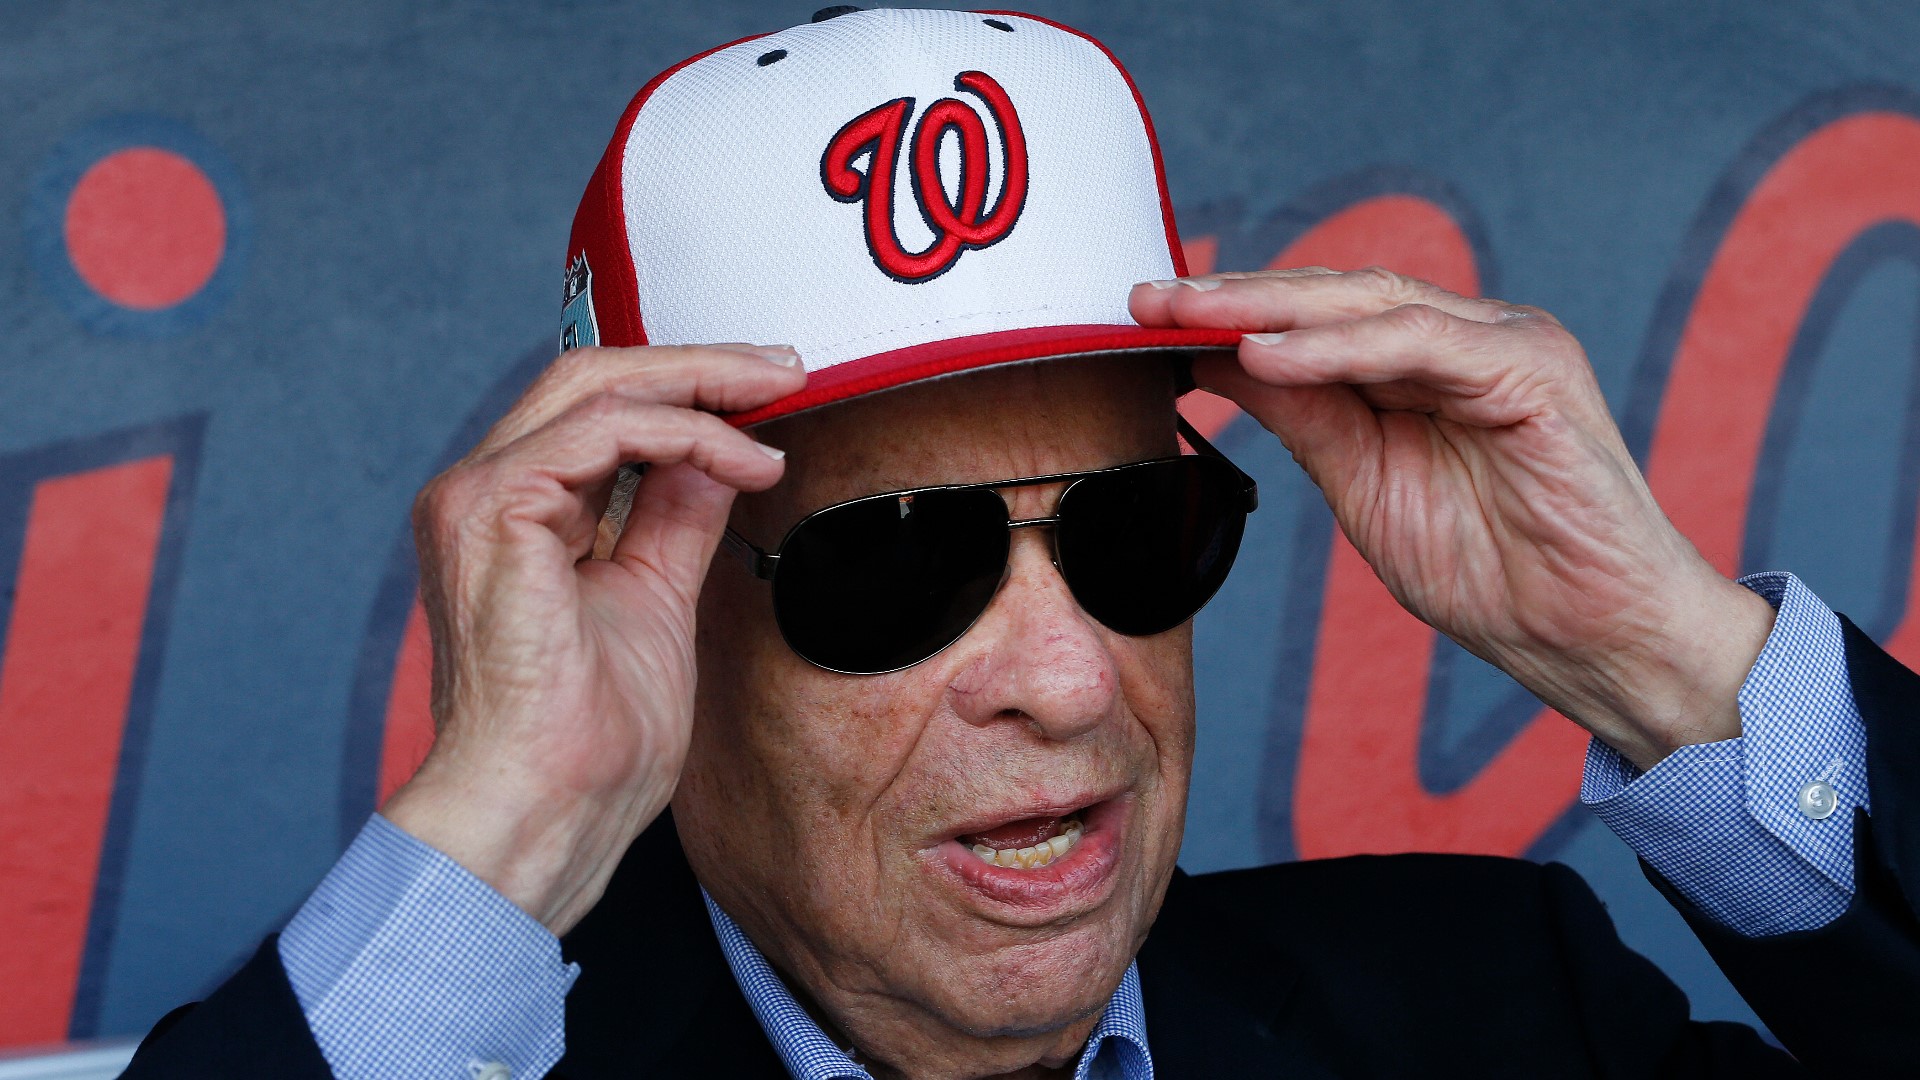 Ted Lerner, who became the principal owner of the Washington Nationals, has died. He passed away at his home in Chevy Chase, Maryland on Sunday.